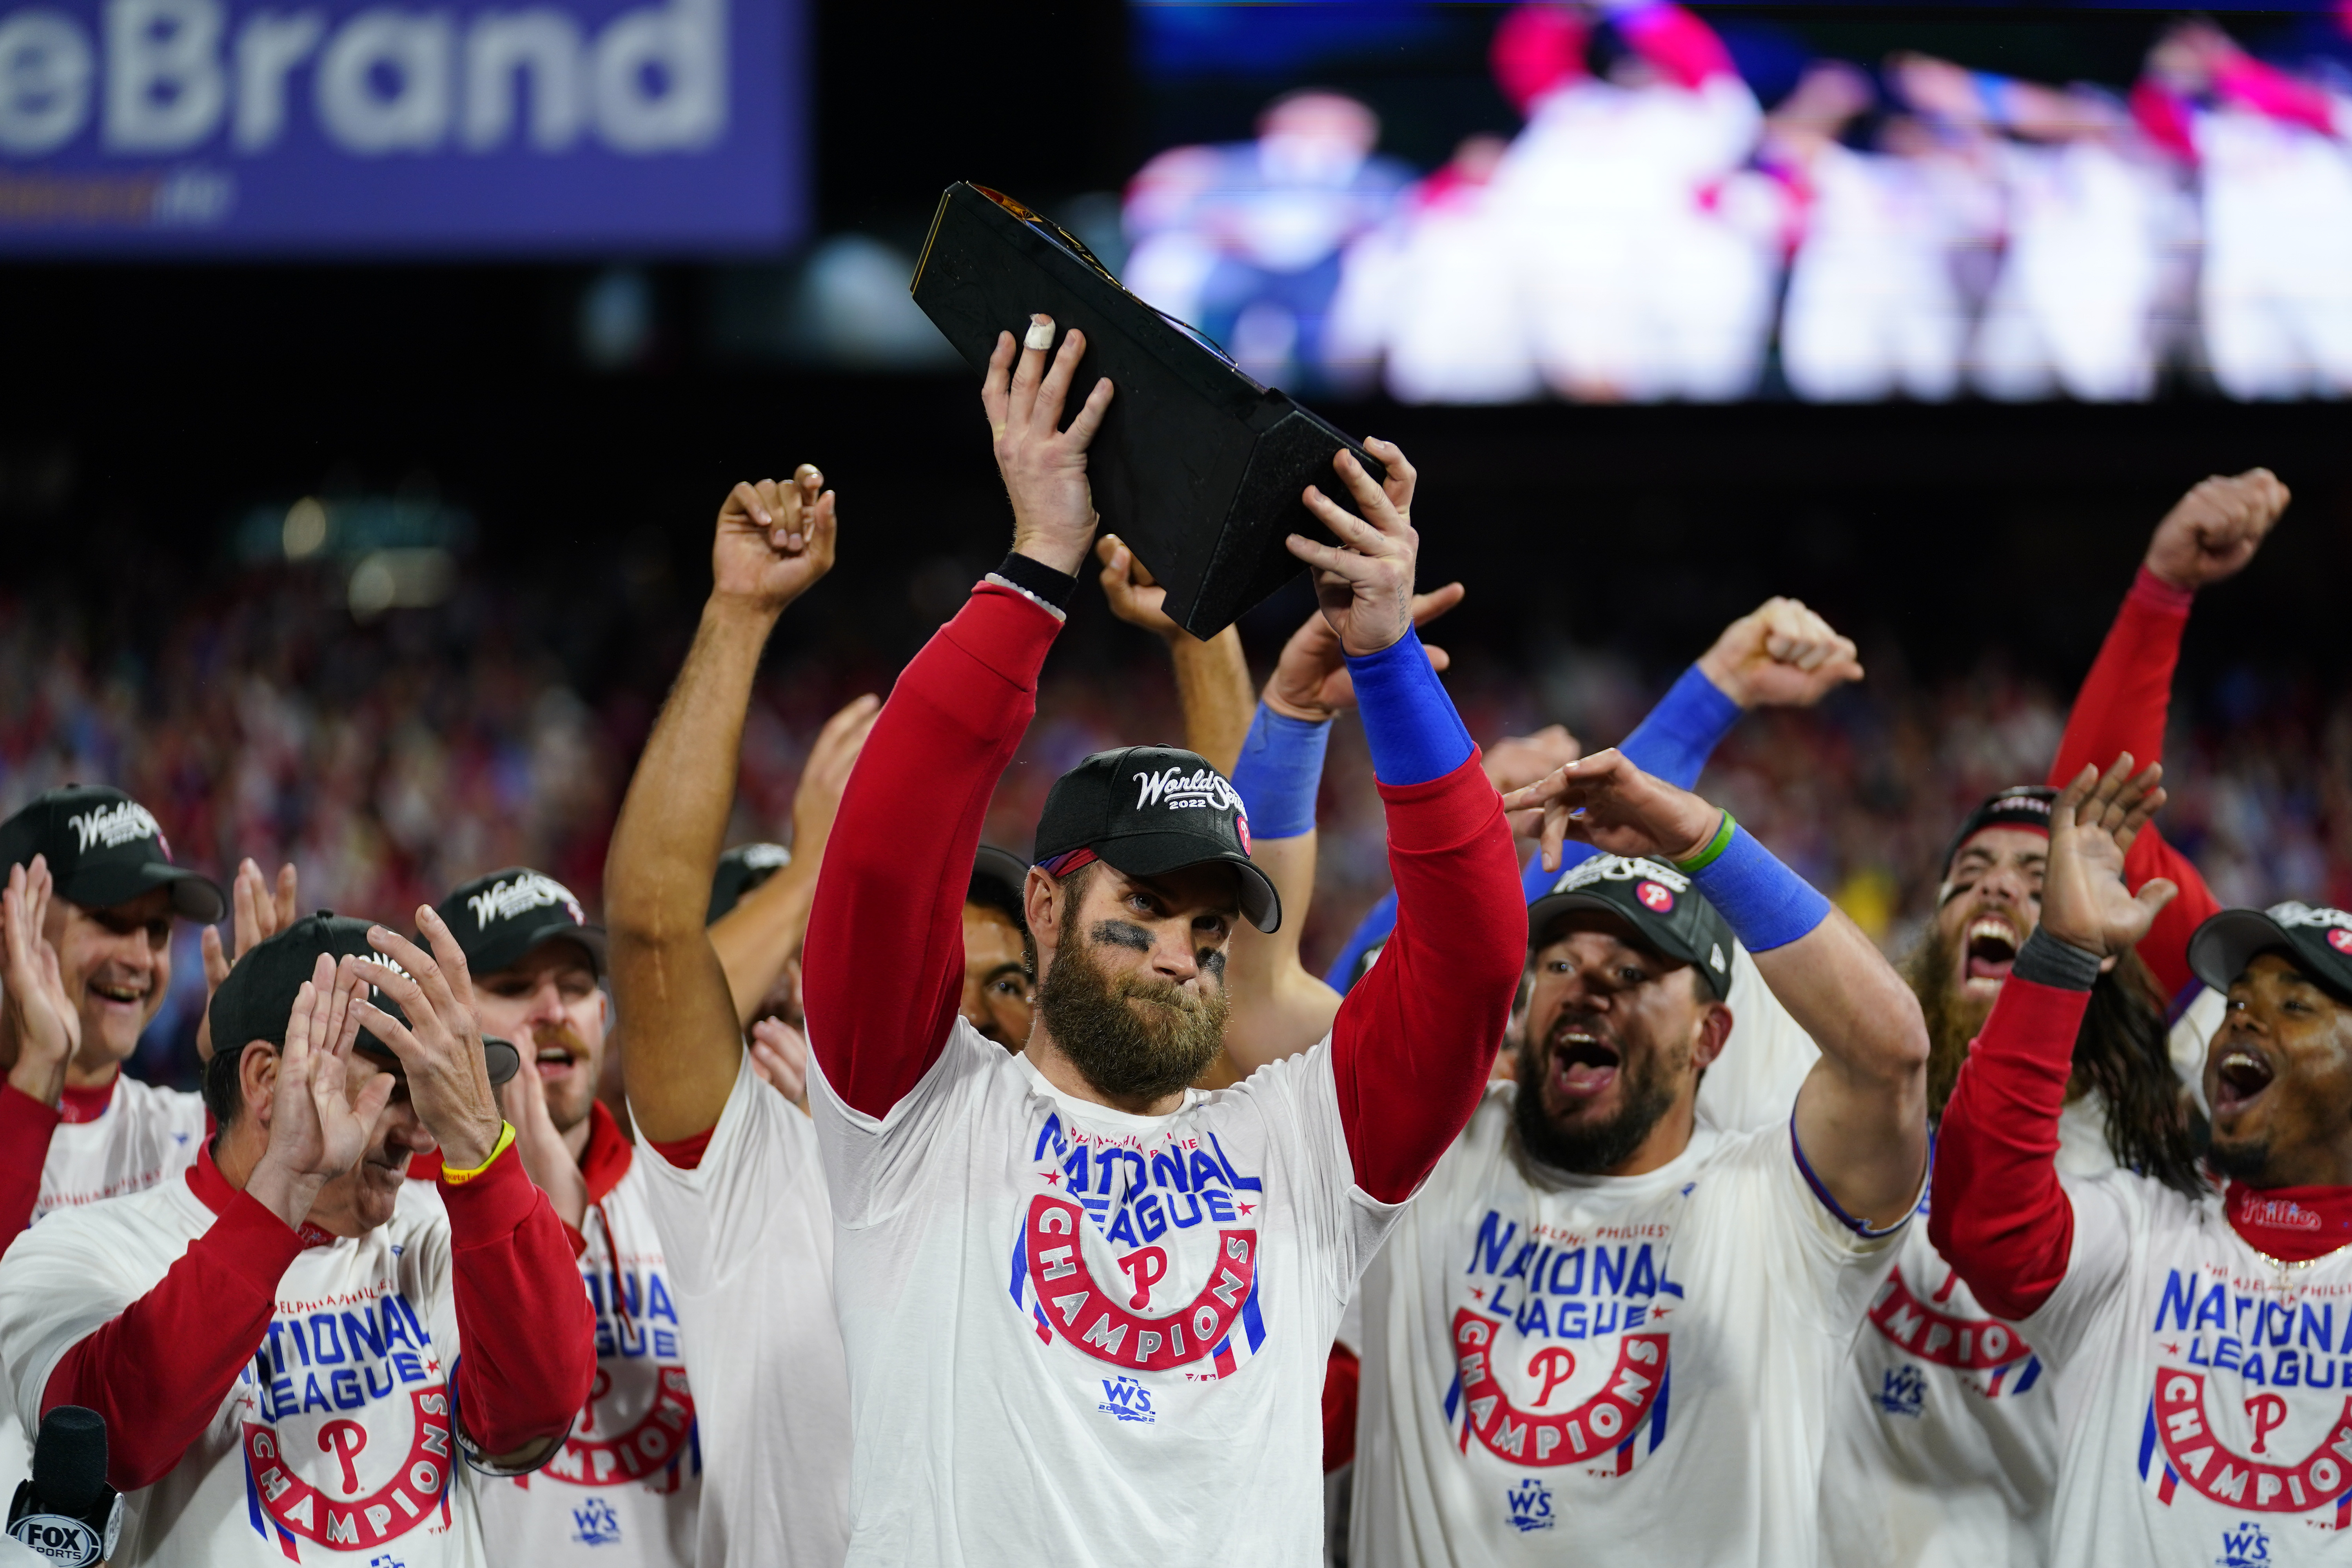 Harper's HR powers Phillies past Padres, into World Series, SiouxlandProud, Sioux City, IA